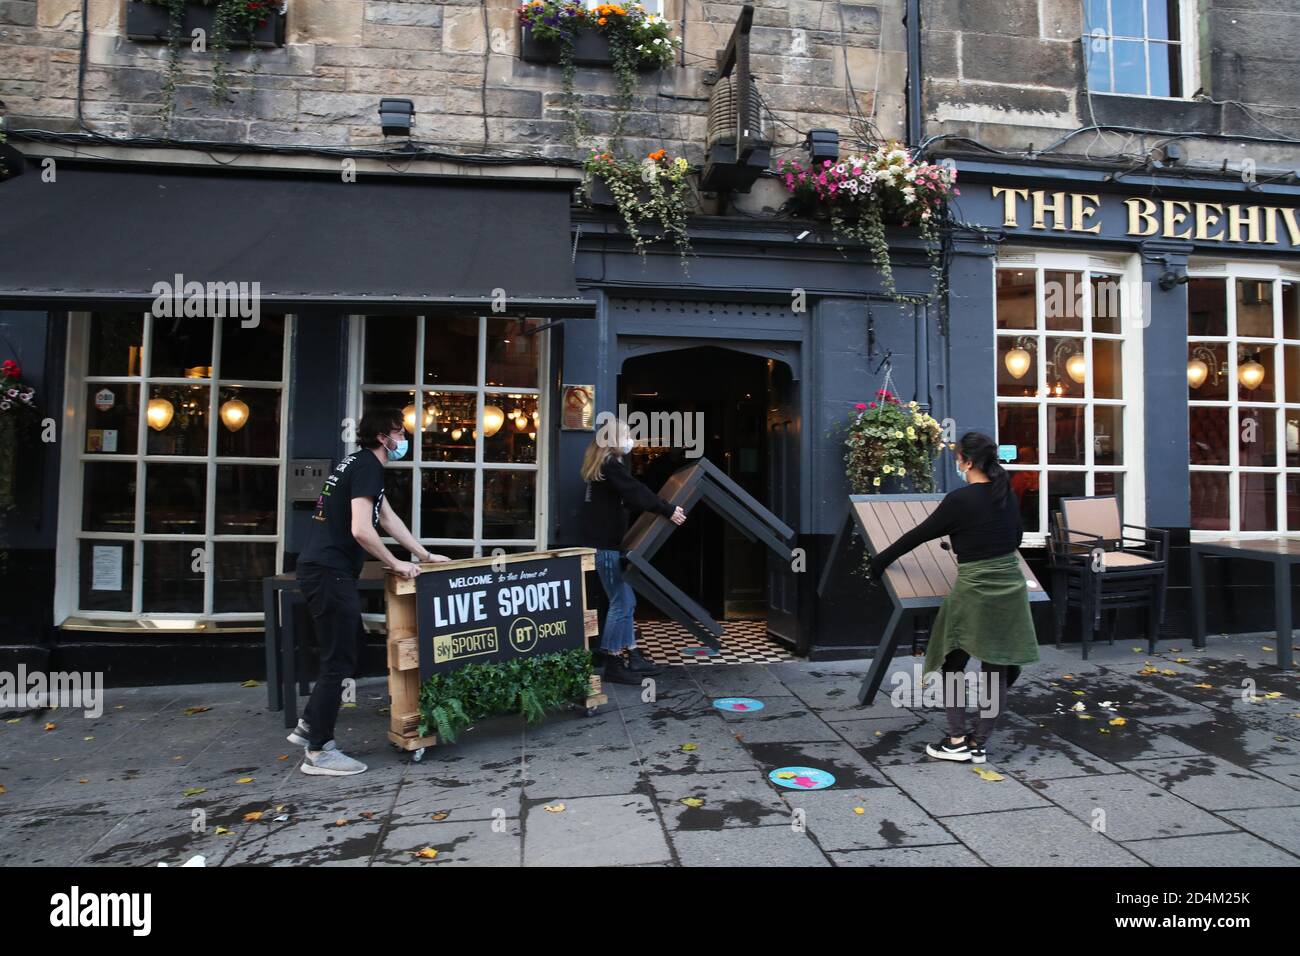 People clear away outside The Beehive Inn in The Grassmarket, Edinburgh, as temporary restrictions announced by First Minister Nicola Sturgeon to help curb the spread of coronavirus have come into effect from 6pm on Friday. Stock Photo